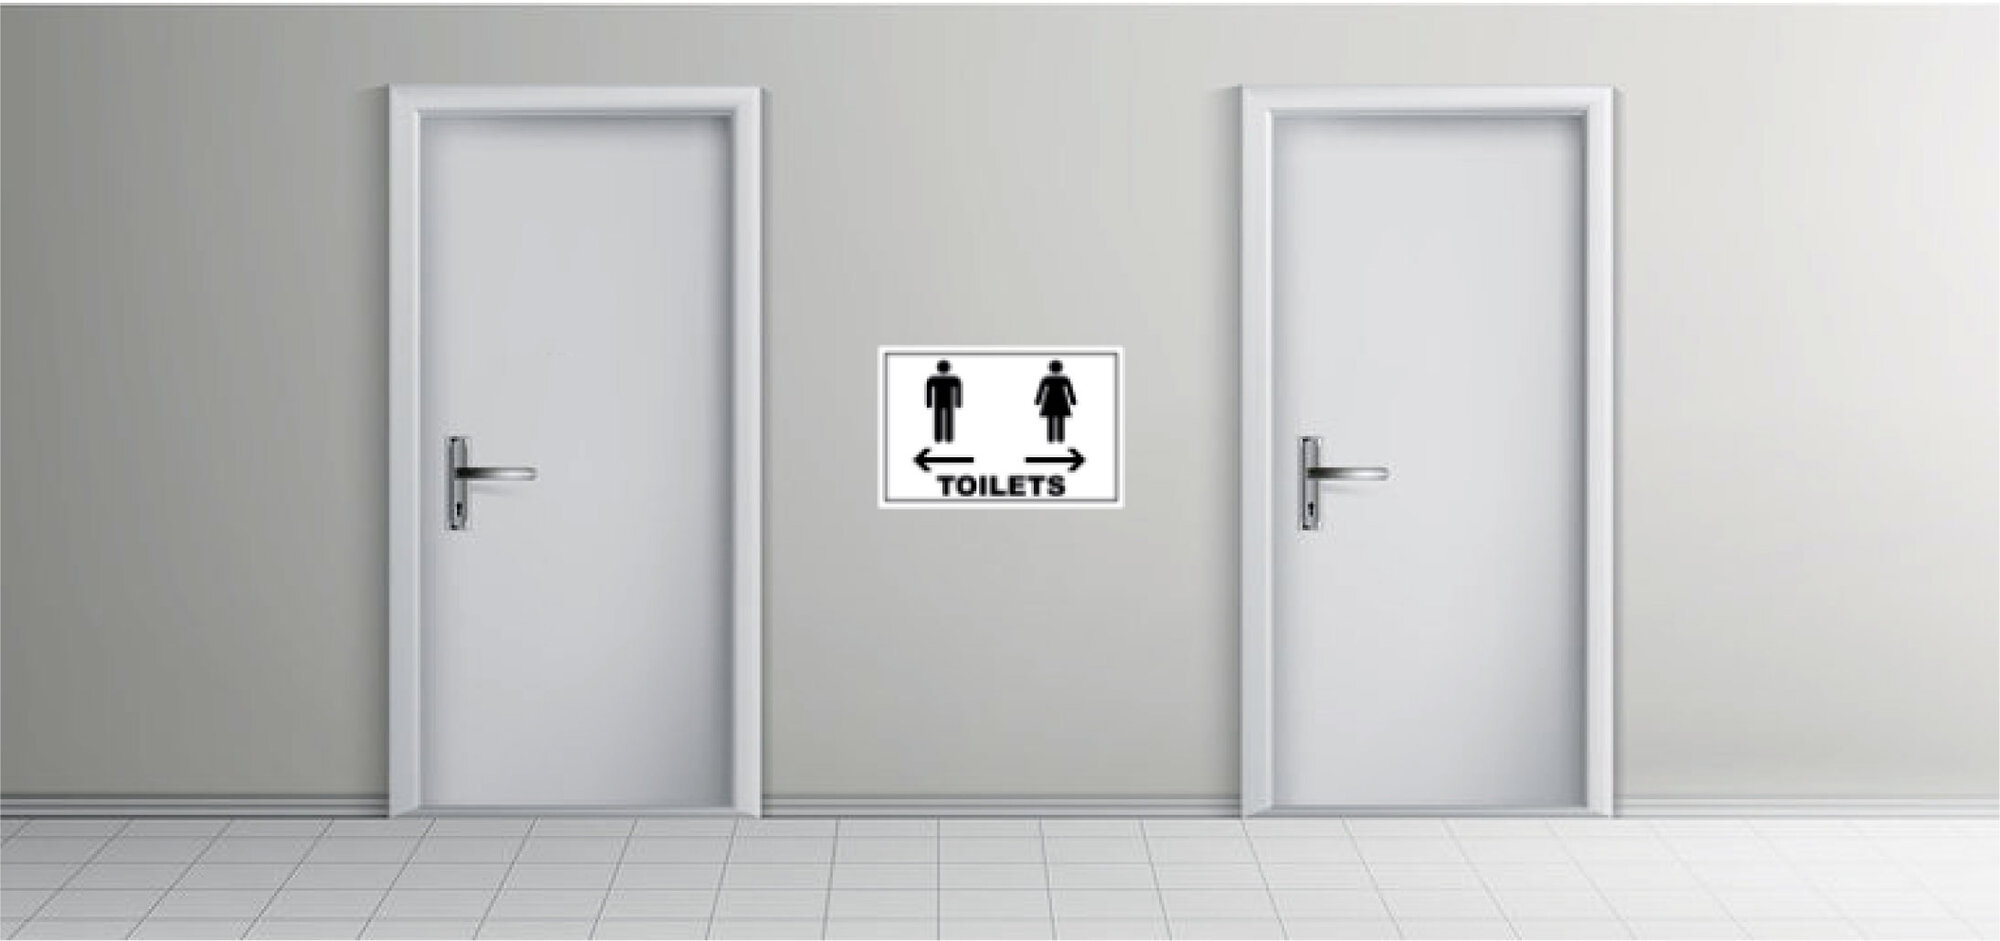 https://www.nplabel.com/images/products_gallery_images/160115B-Toilets.jpg